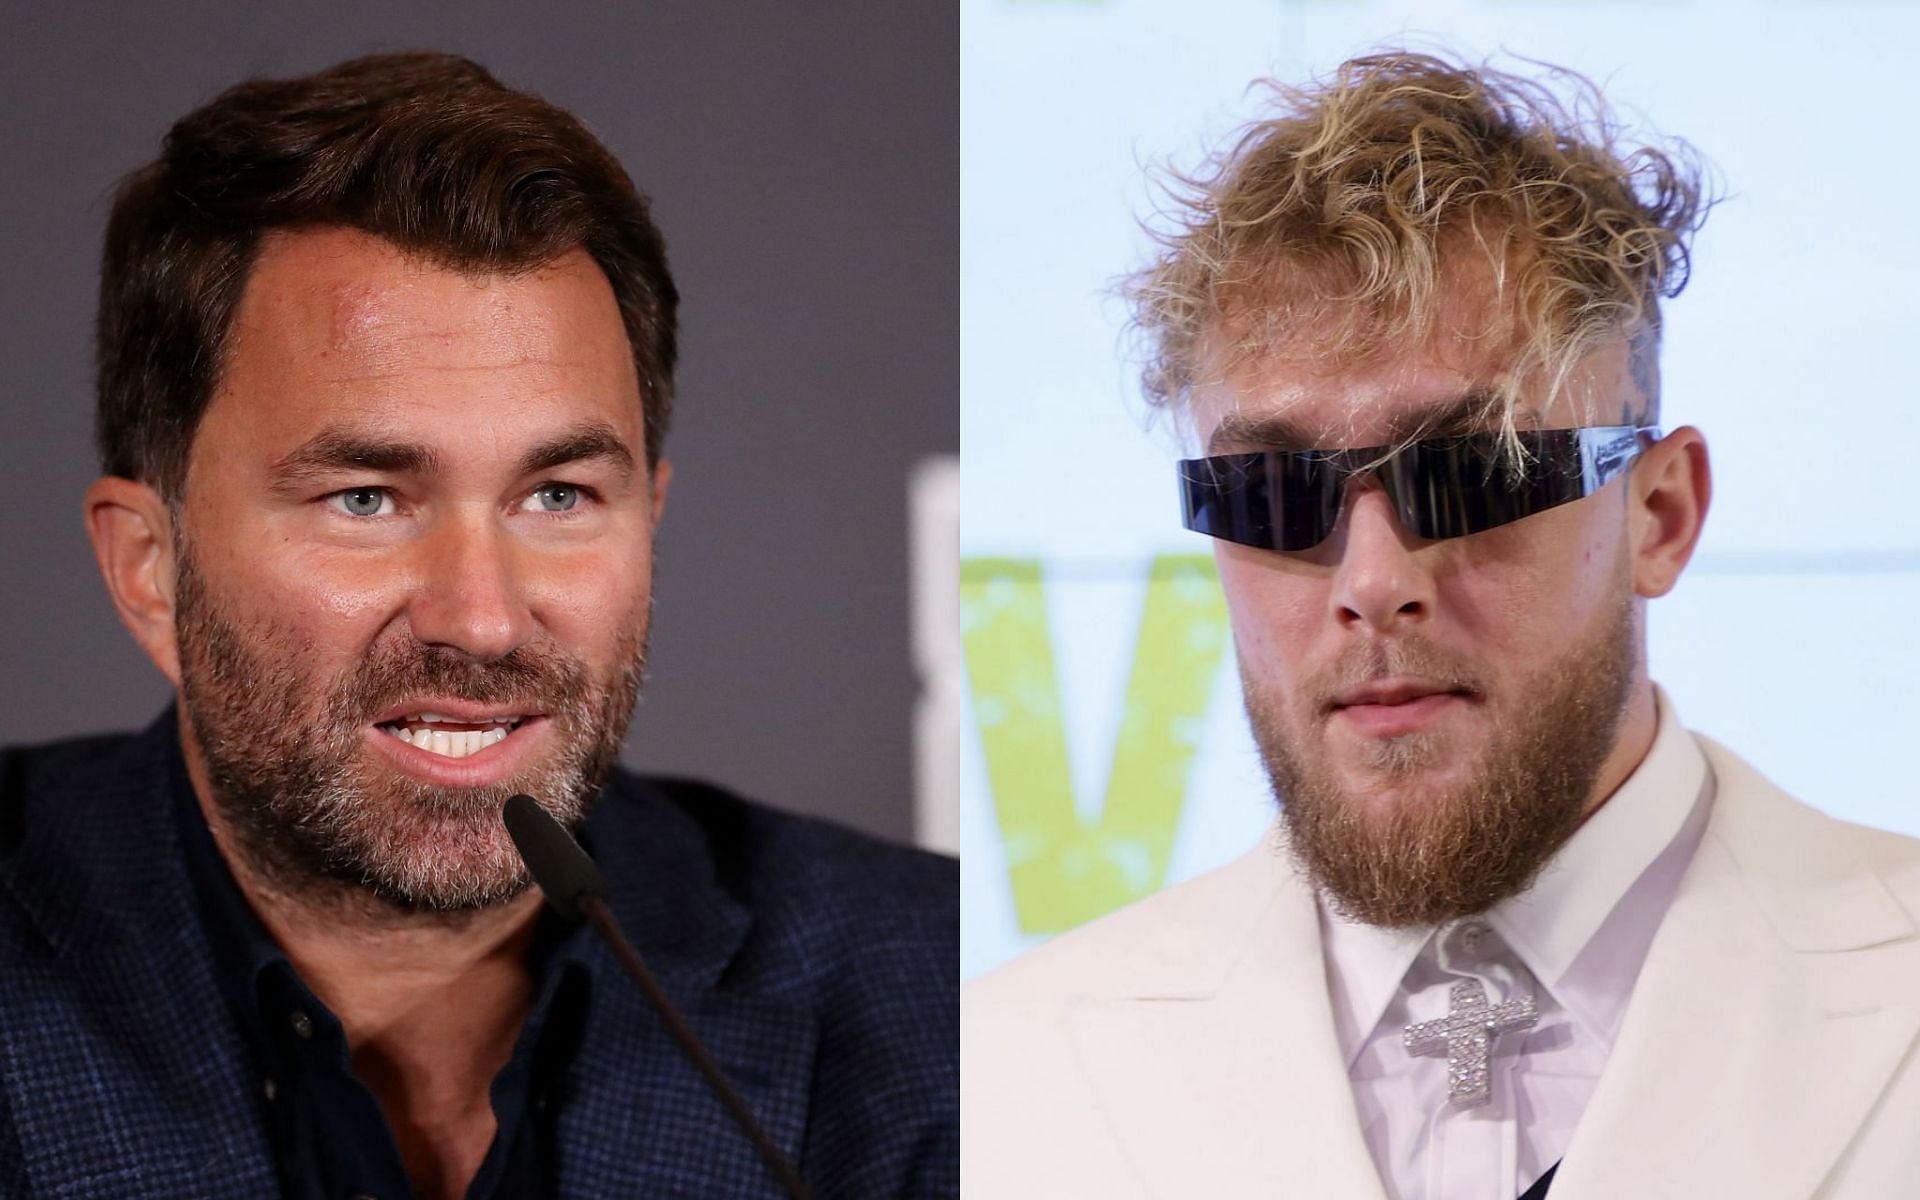 Eddie Hearn has admitted that Jake Paul is better than some professional fighters he&#039;s seen compete